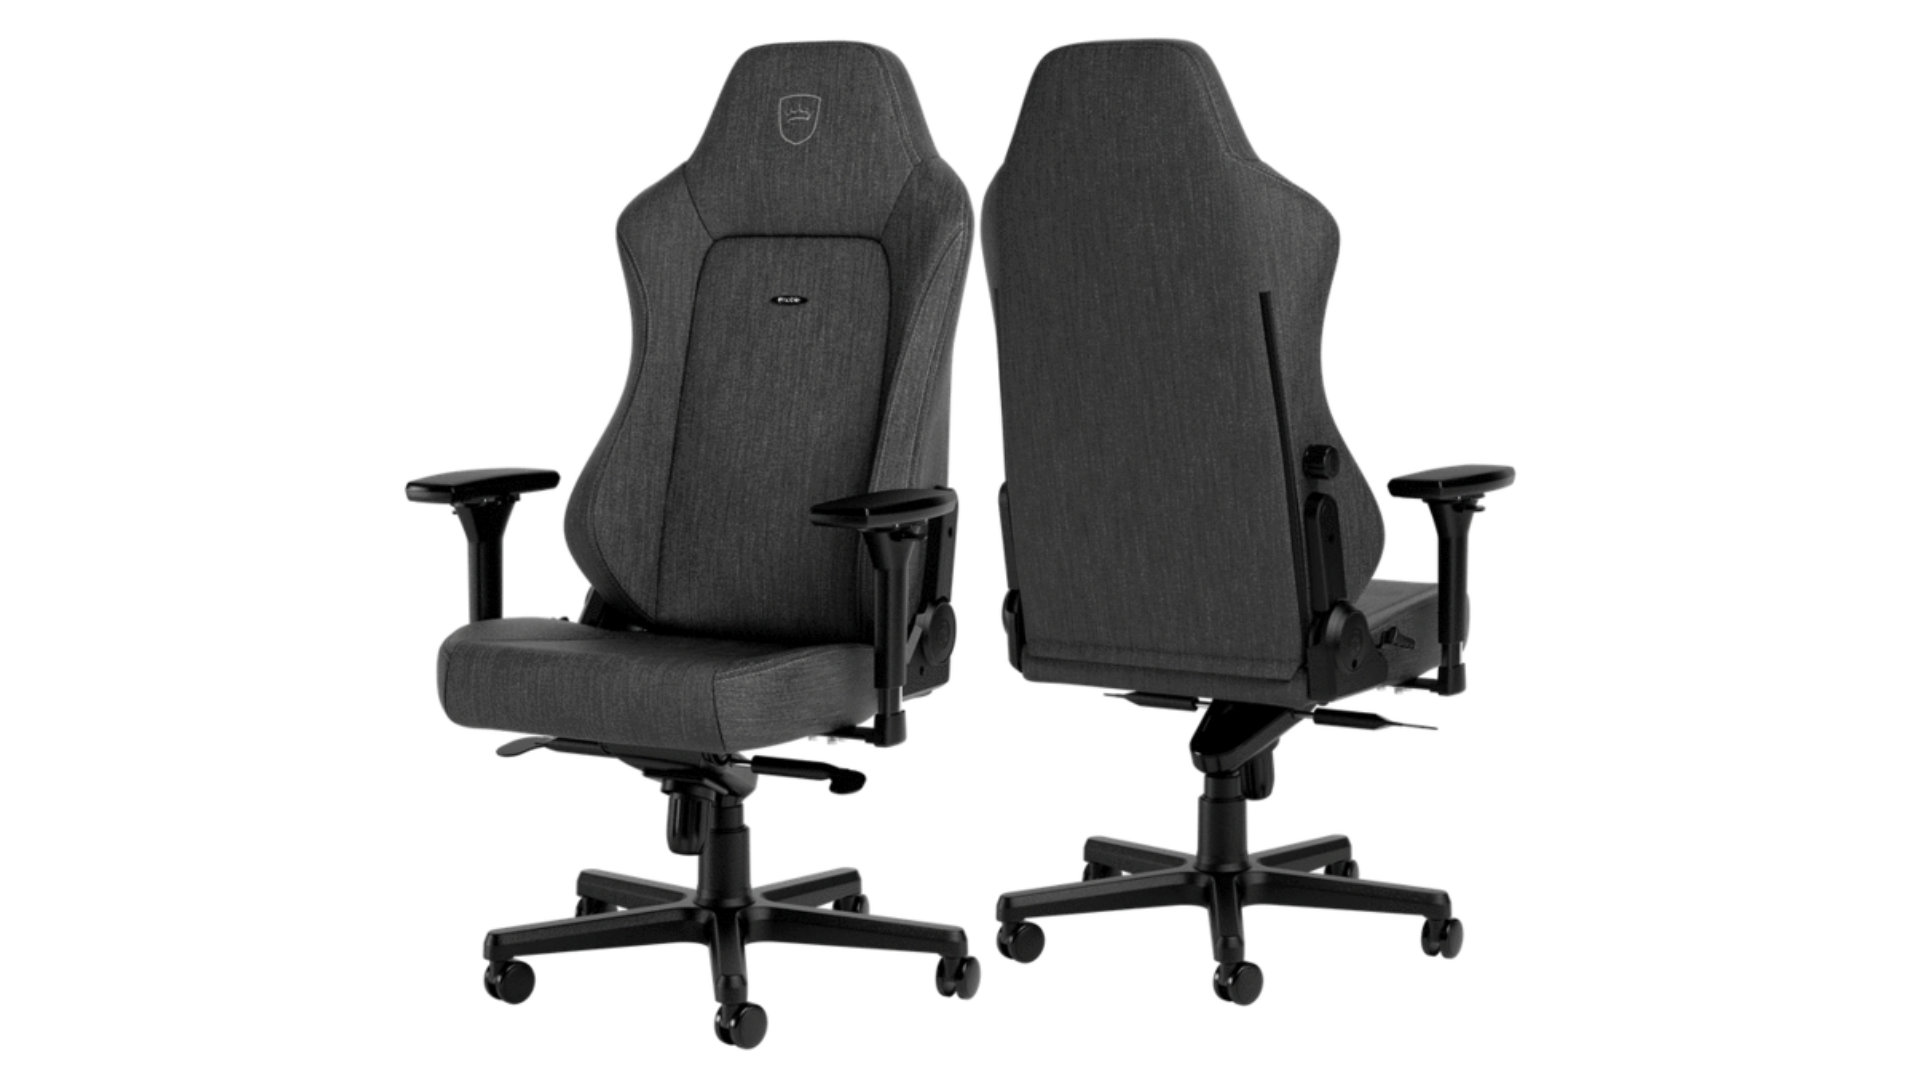 Noblechairs Hero TX gaming chair review – comfort at a cost